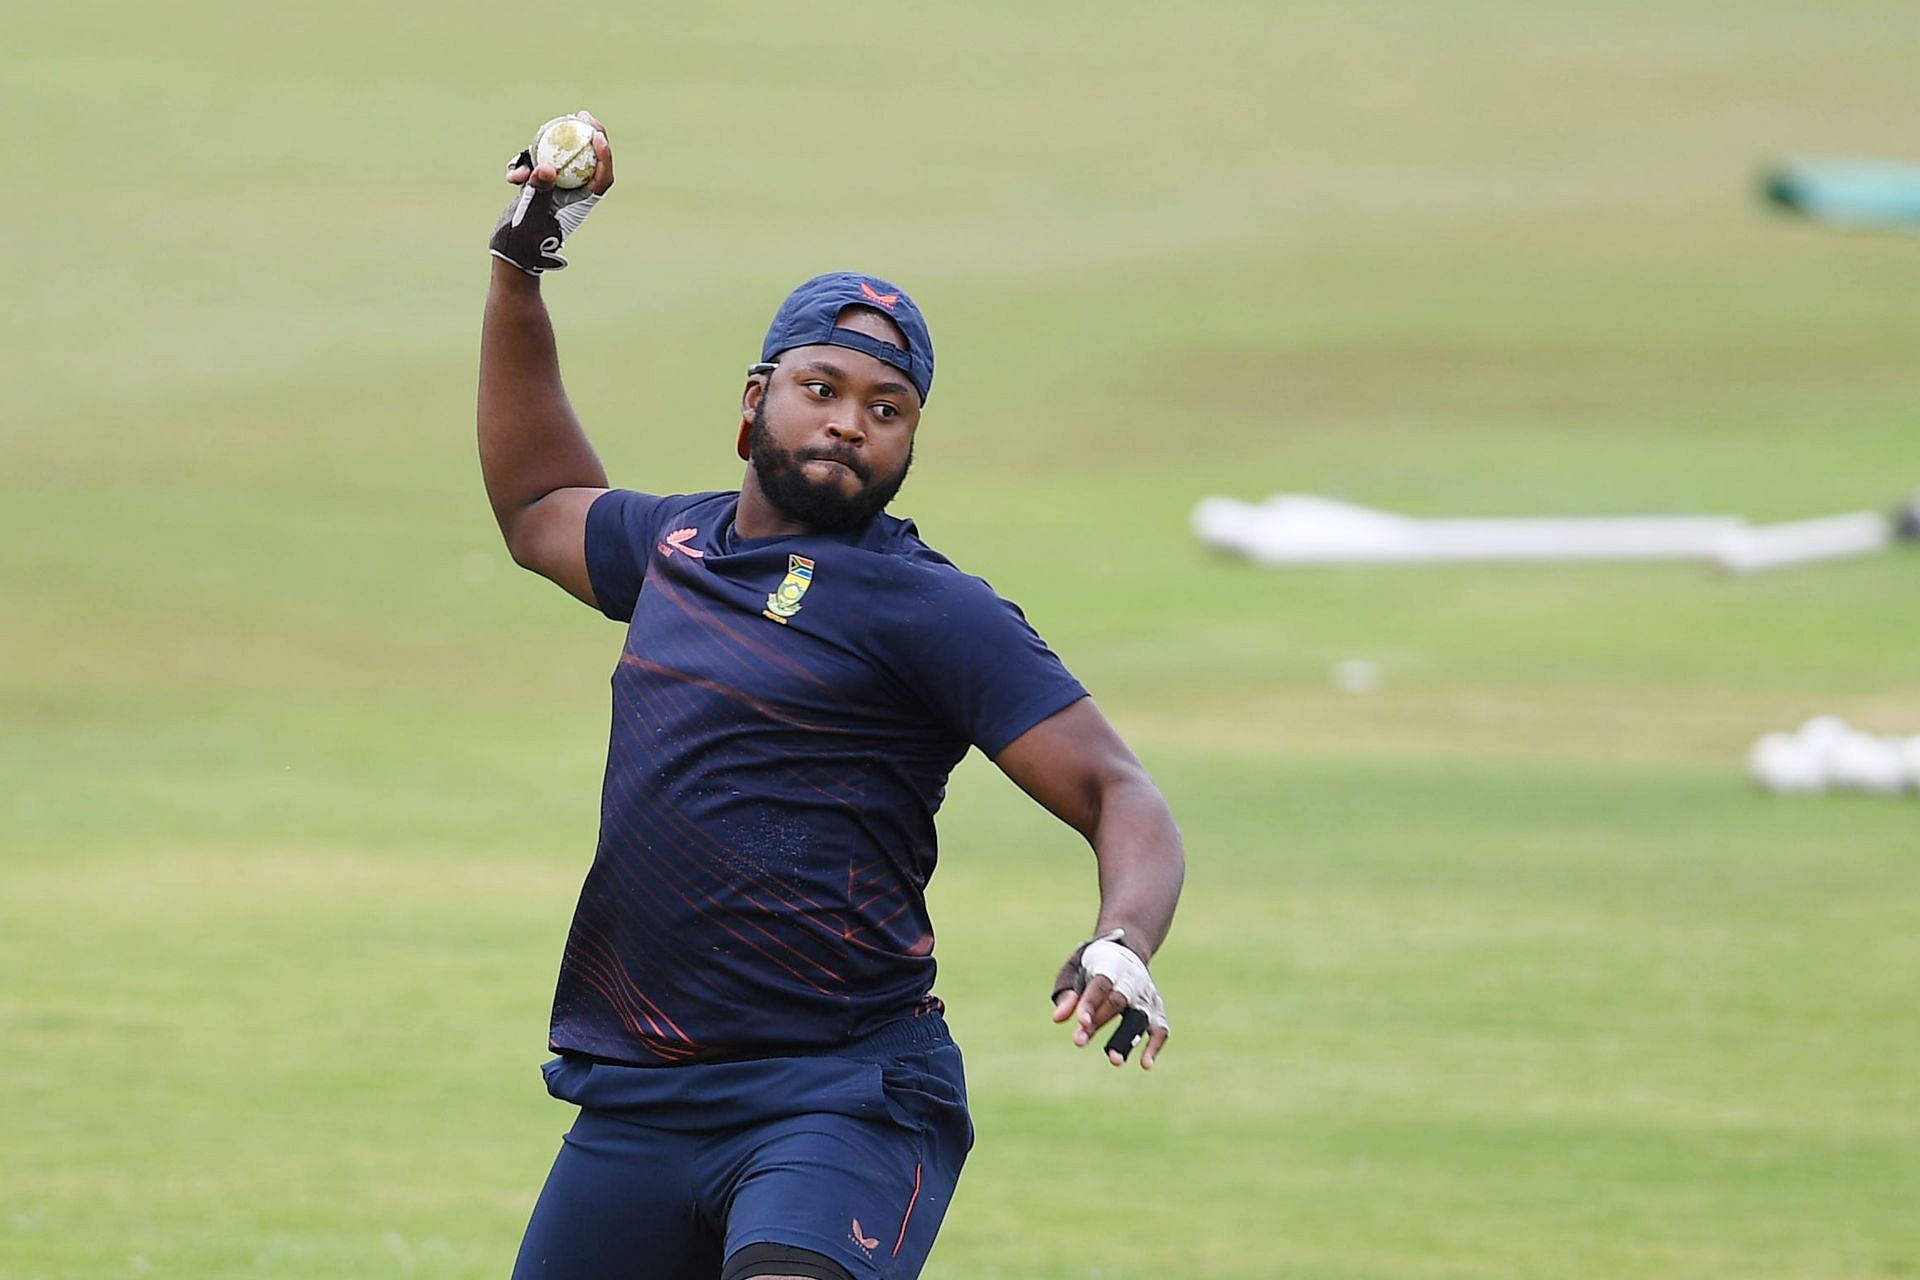 Andile Phehlukwayo represents Dolphins in the CSA T20 Challenge 2022